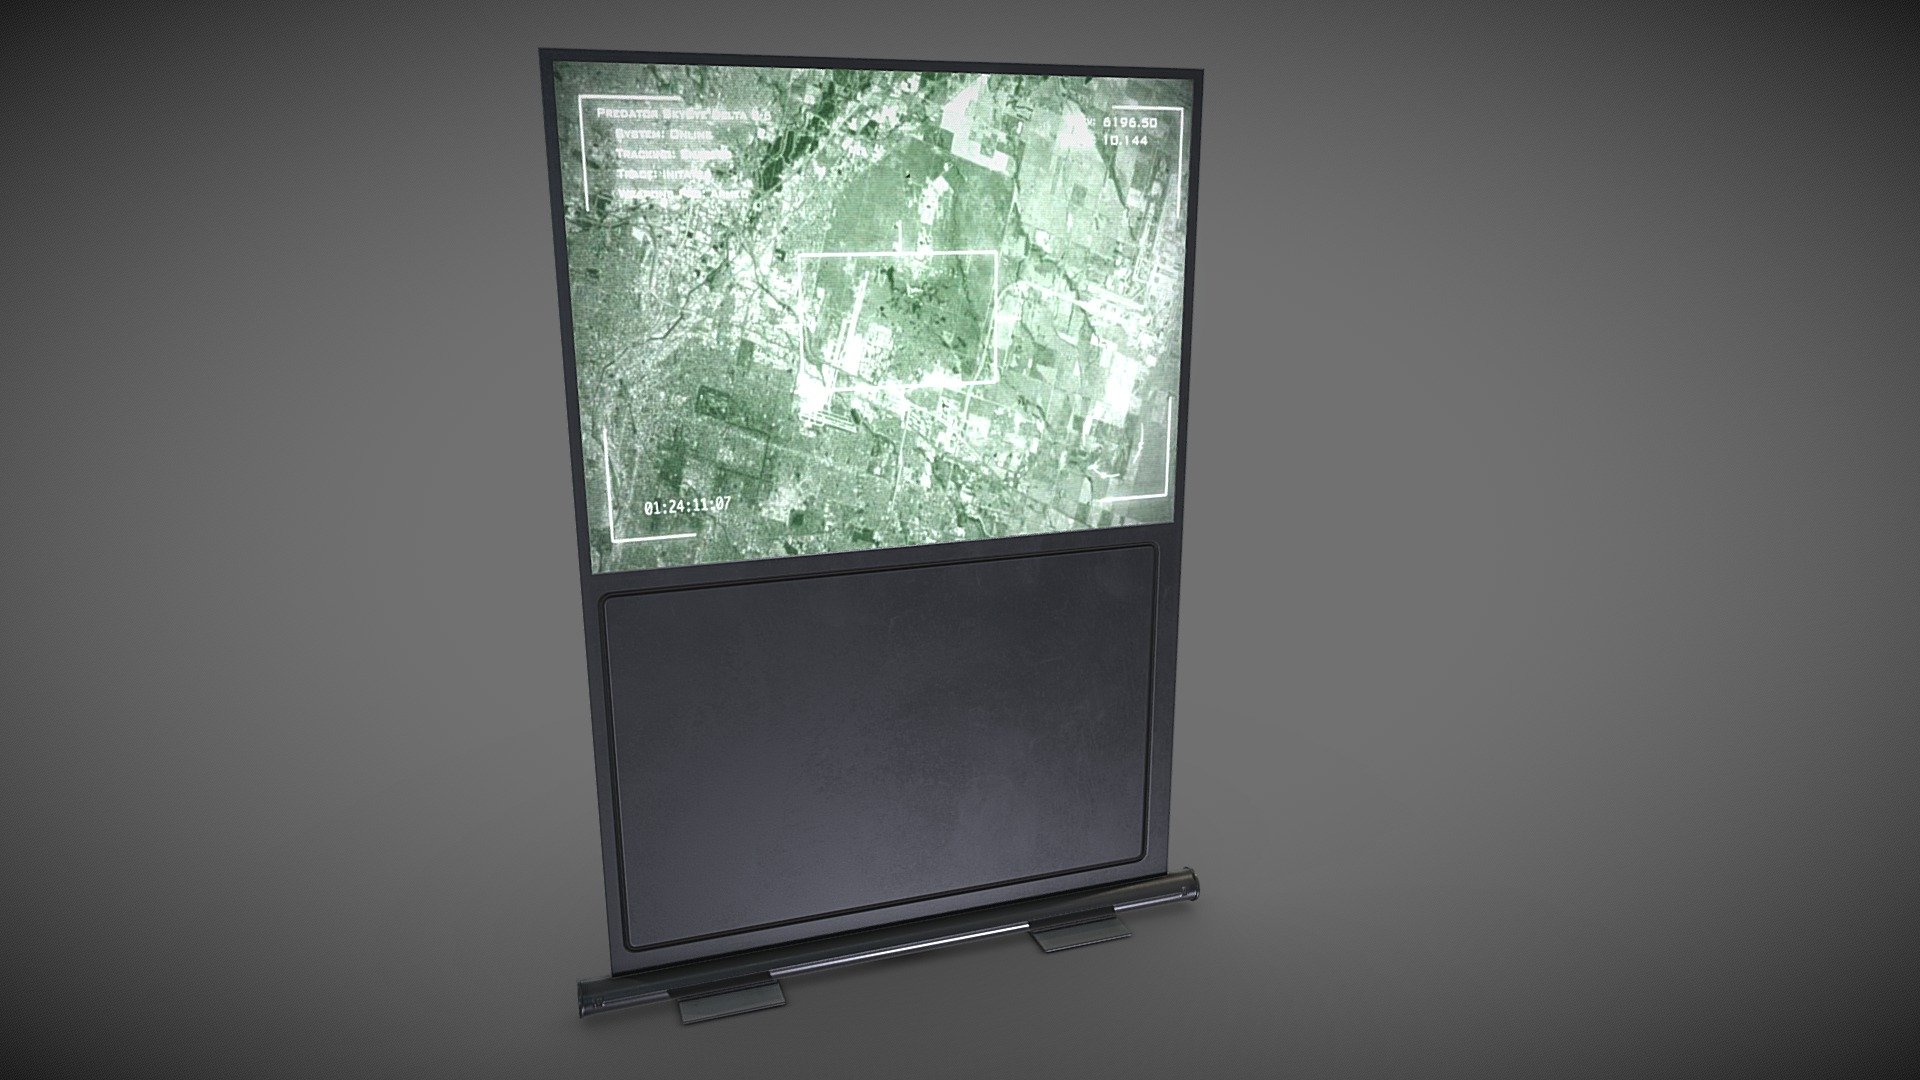 simple Projector screen with military footage.  Handy prop for any military style environment. 

Easily re-textured if needs be. 

PBR textures @4k - Simple TV Projector screen - Download Free 3D model by Sousinho 3d model